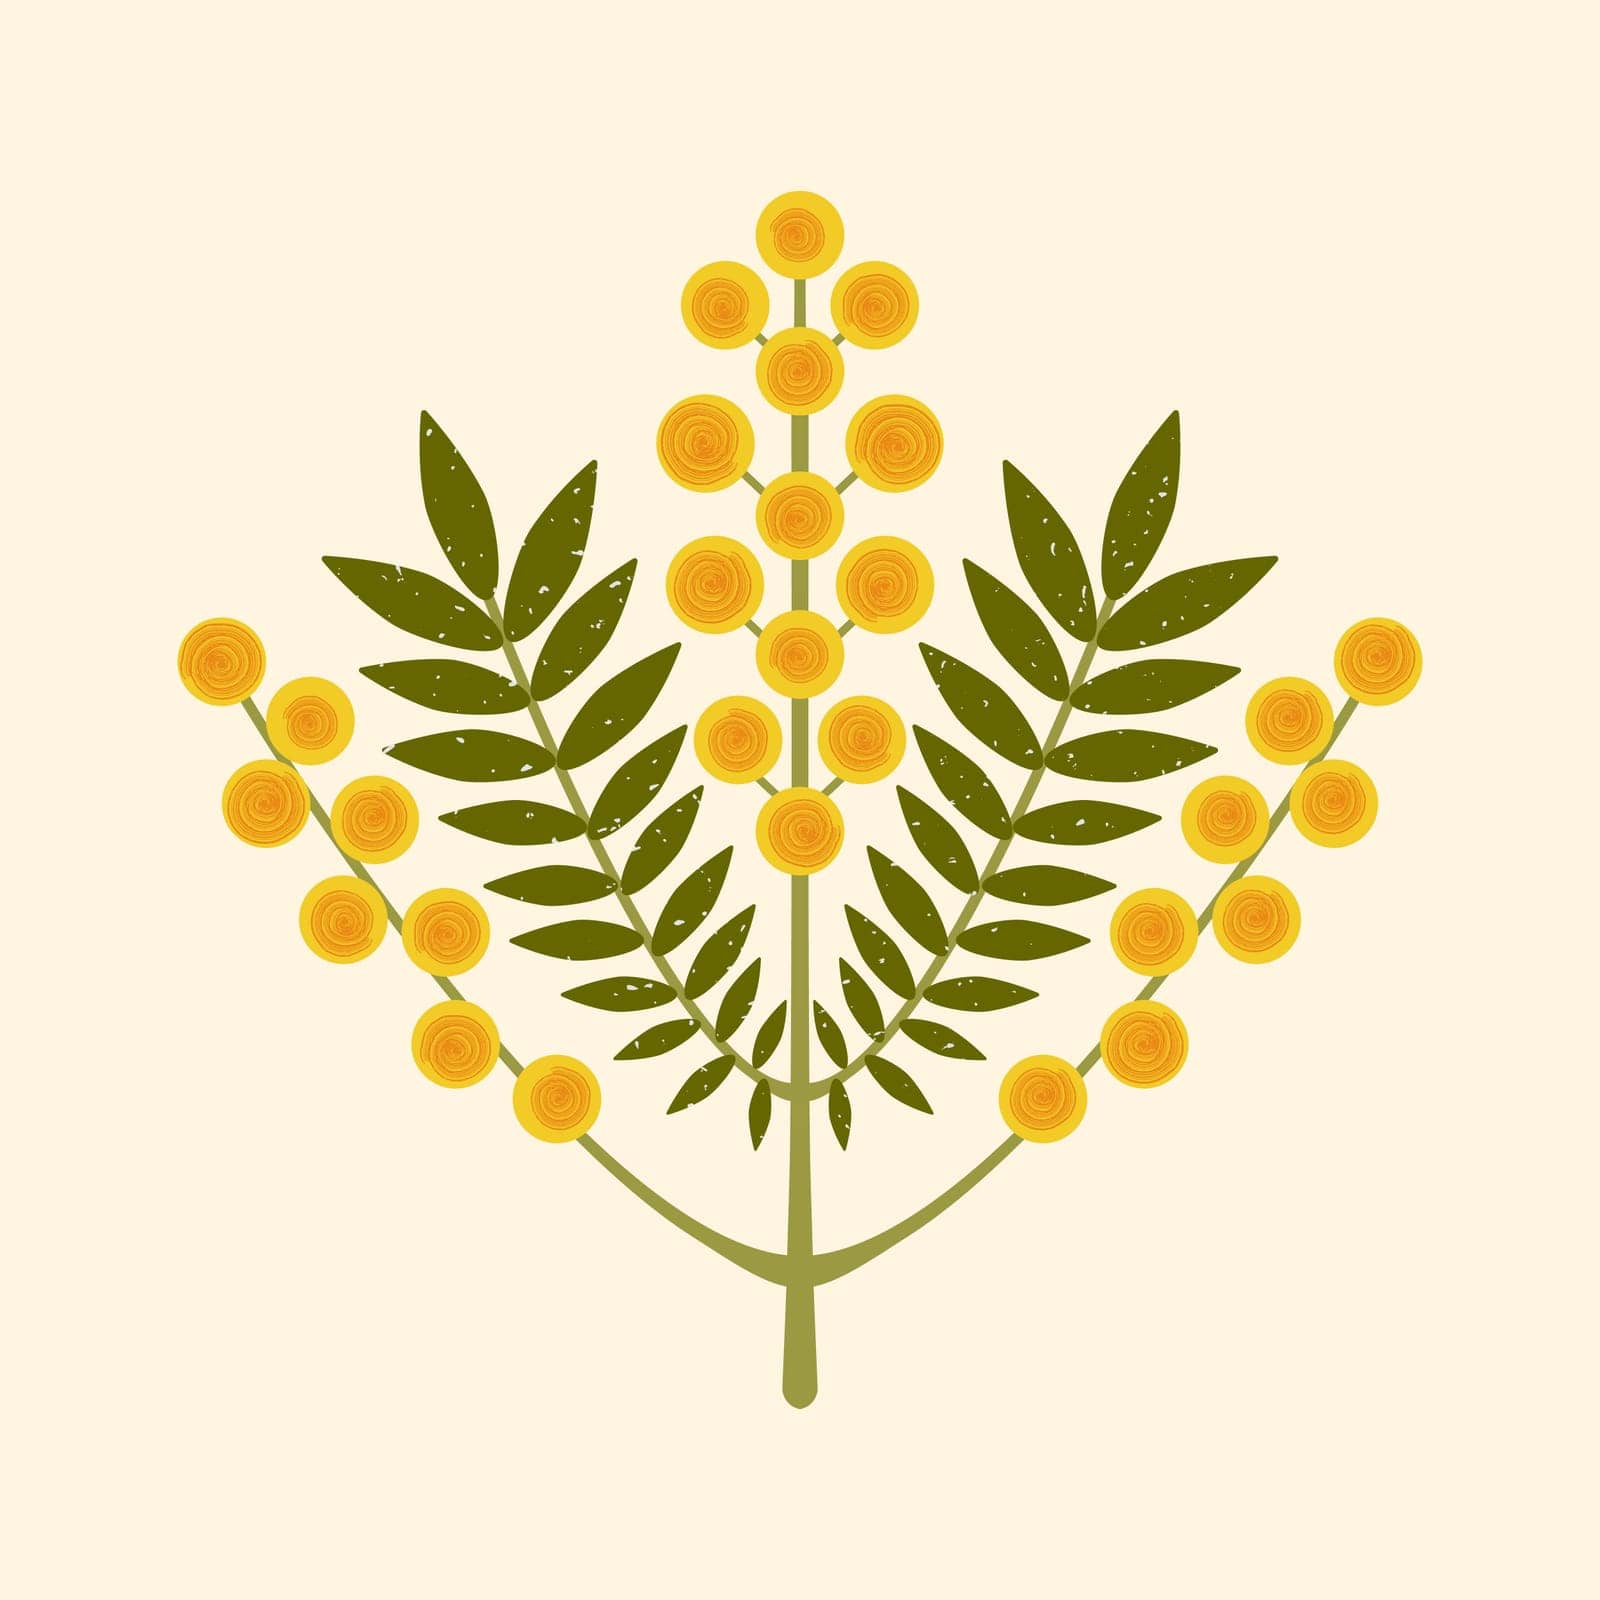 Geometric flower vector illustration. Modern symmetrical Mimosa branch with yellow flowers and leaves on pastel background. Australian Silver Wattle plant drawn in folk flat style with brush texture. by Olya_Haifisch